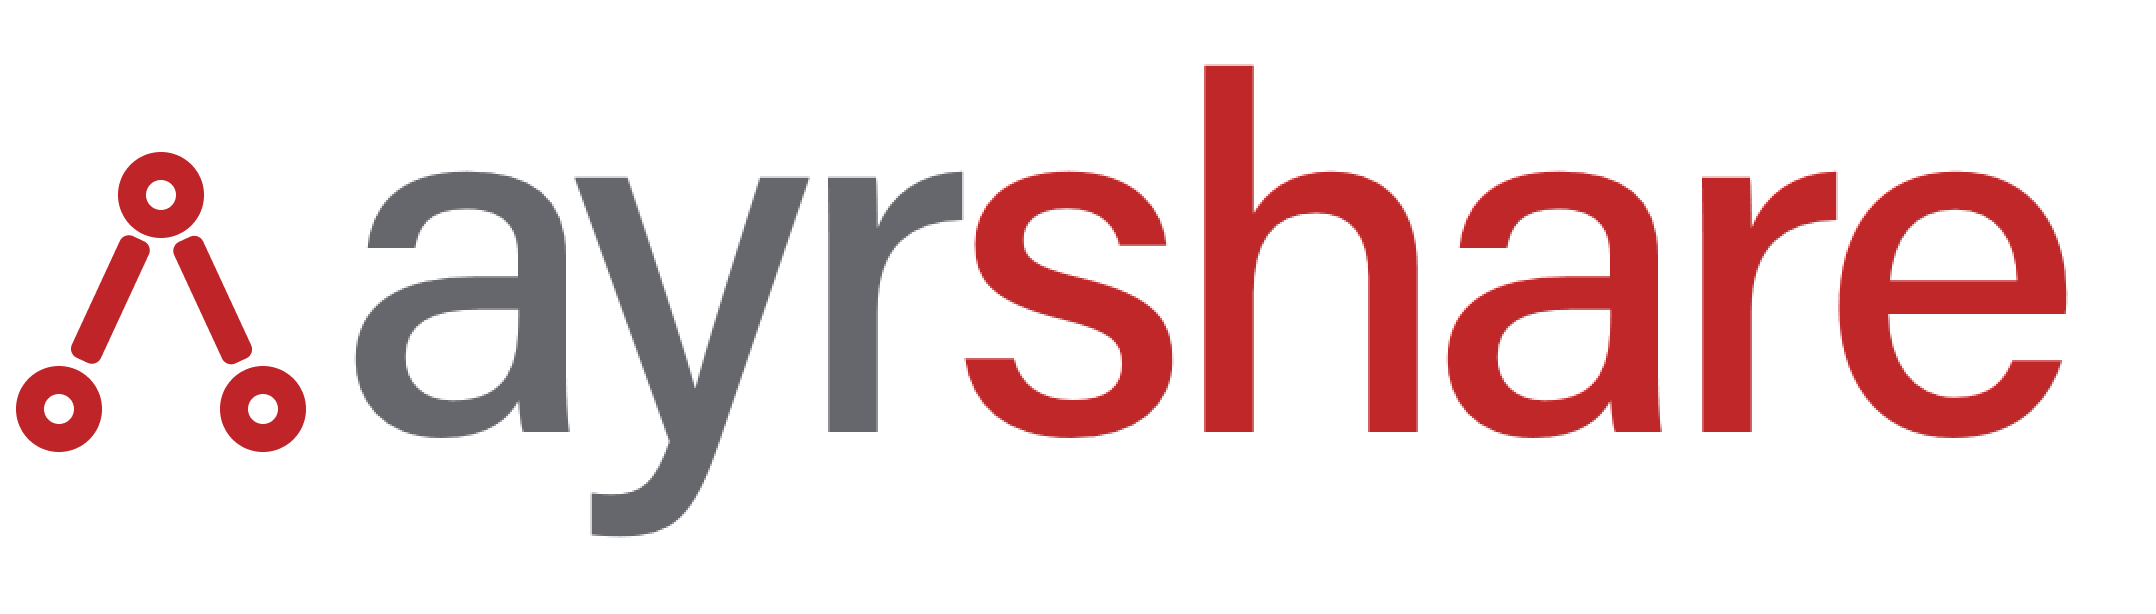 Ayrshare Review